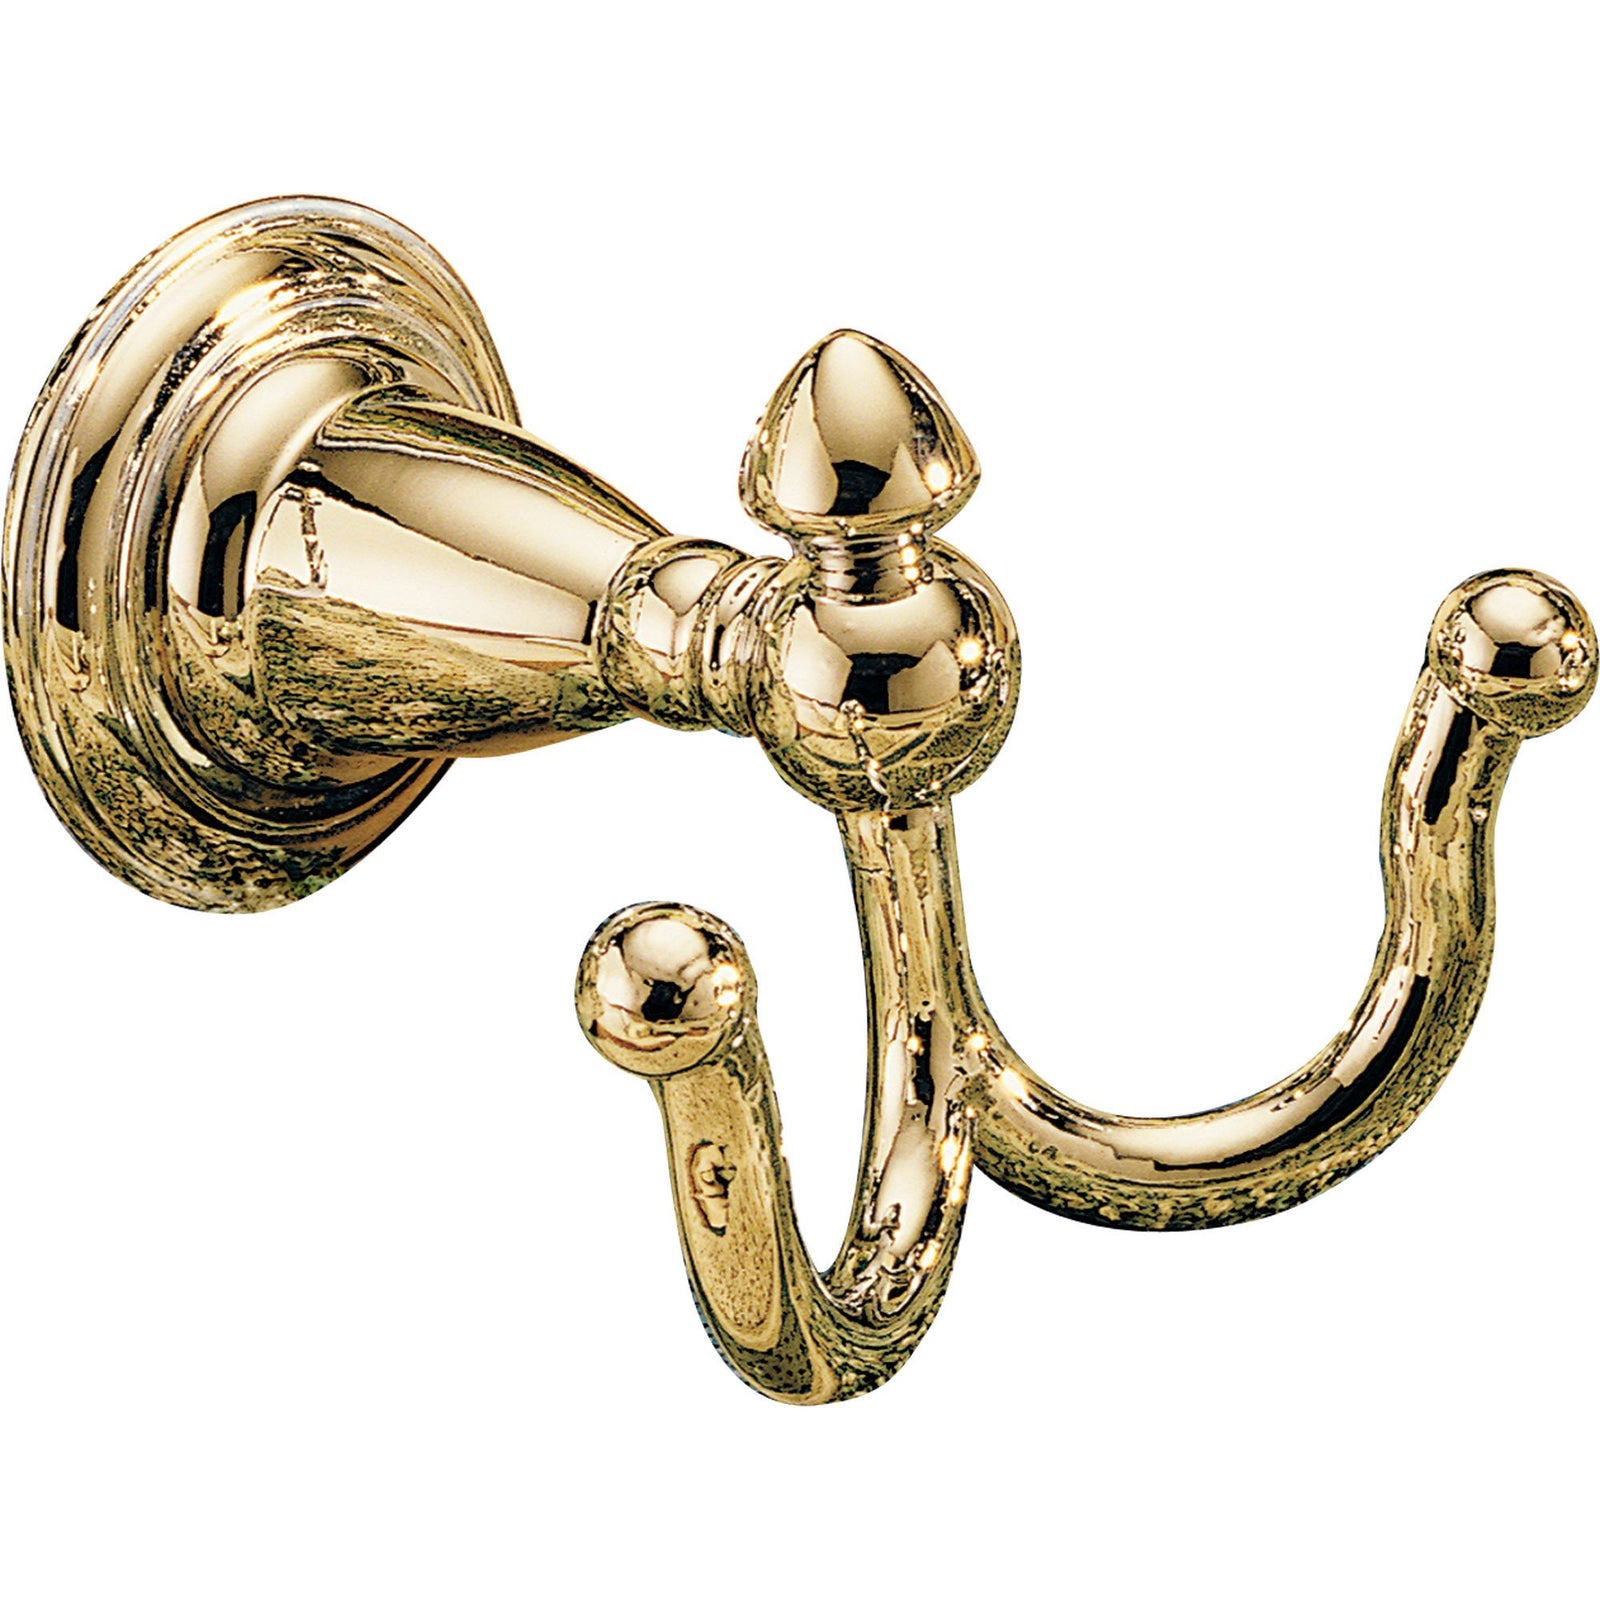 Robe Hooks - Get a Decorative Robe or Towel Hook for you Bathroom Tagged  delta-victorian-collection 